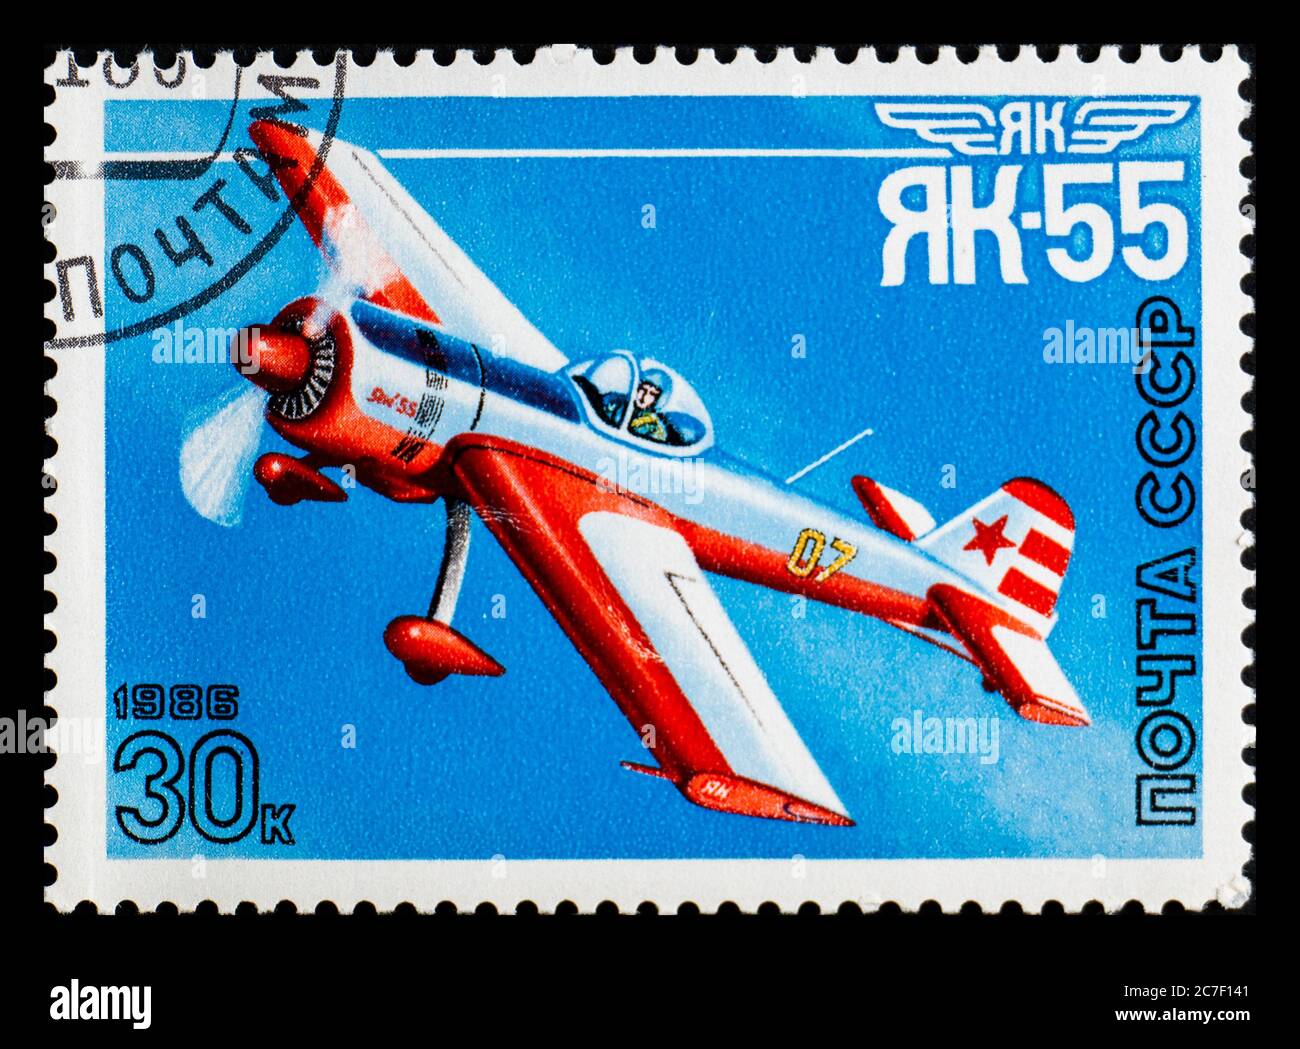 RUSSIA, USSR - CIRCA 1986: A postage stamp from USSR showing aircraft Yakovlev Yak-55 Stock Photo